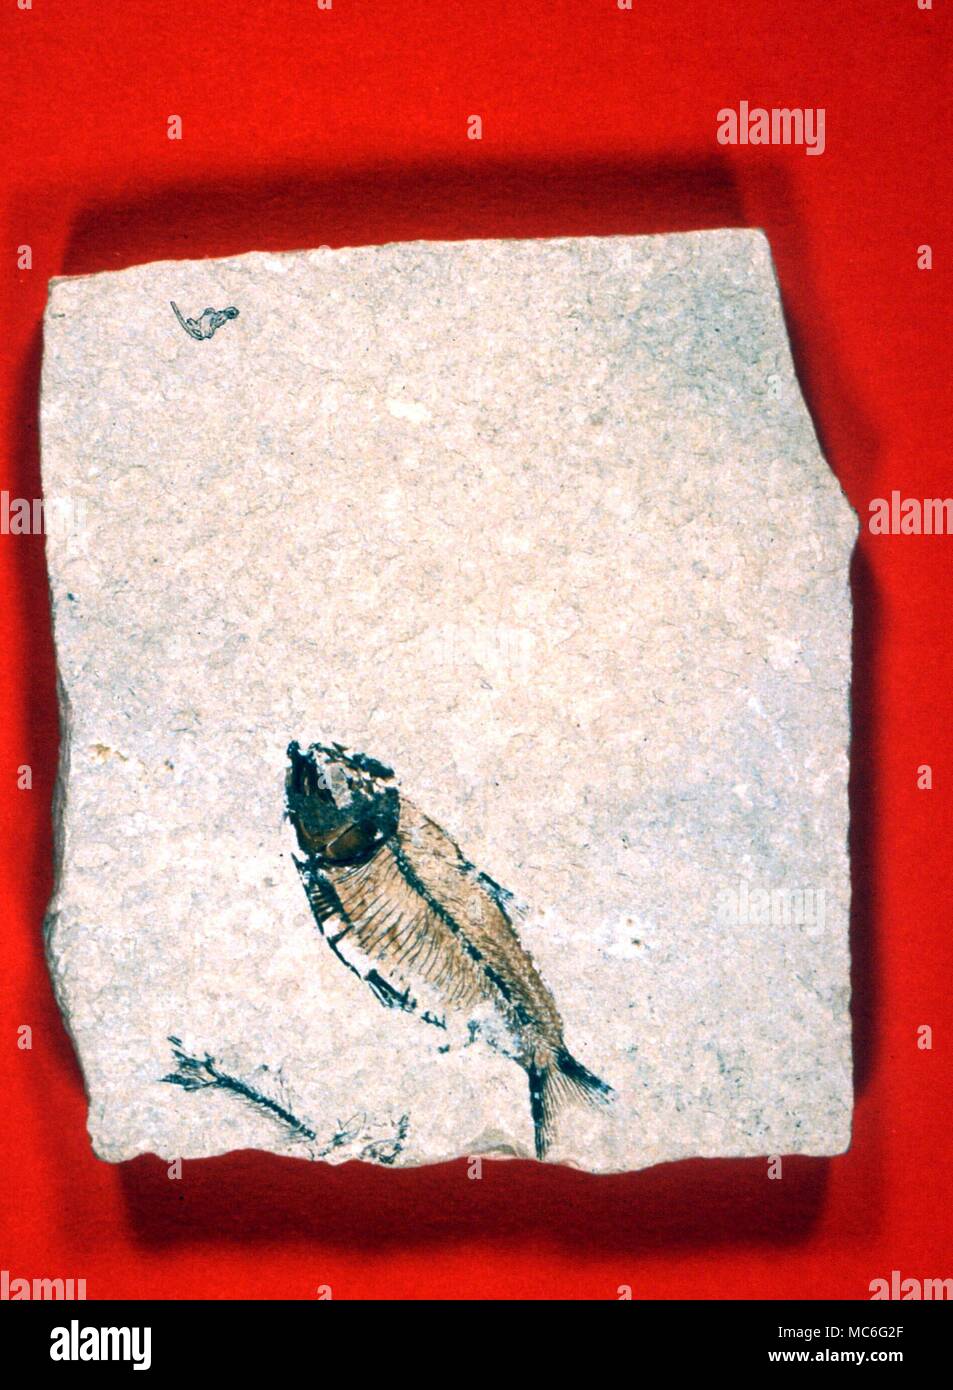 Fossil of fish. Private collection. Stock Photo